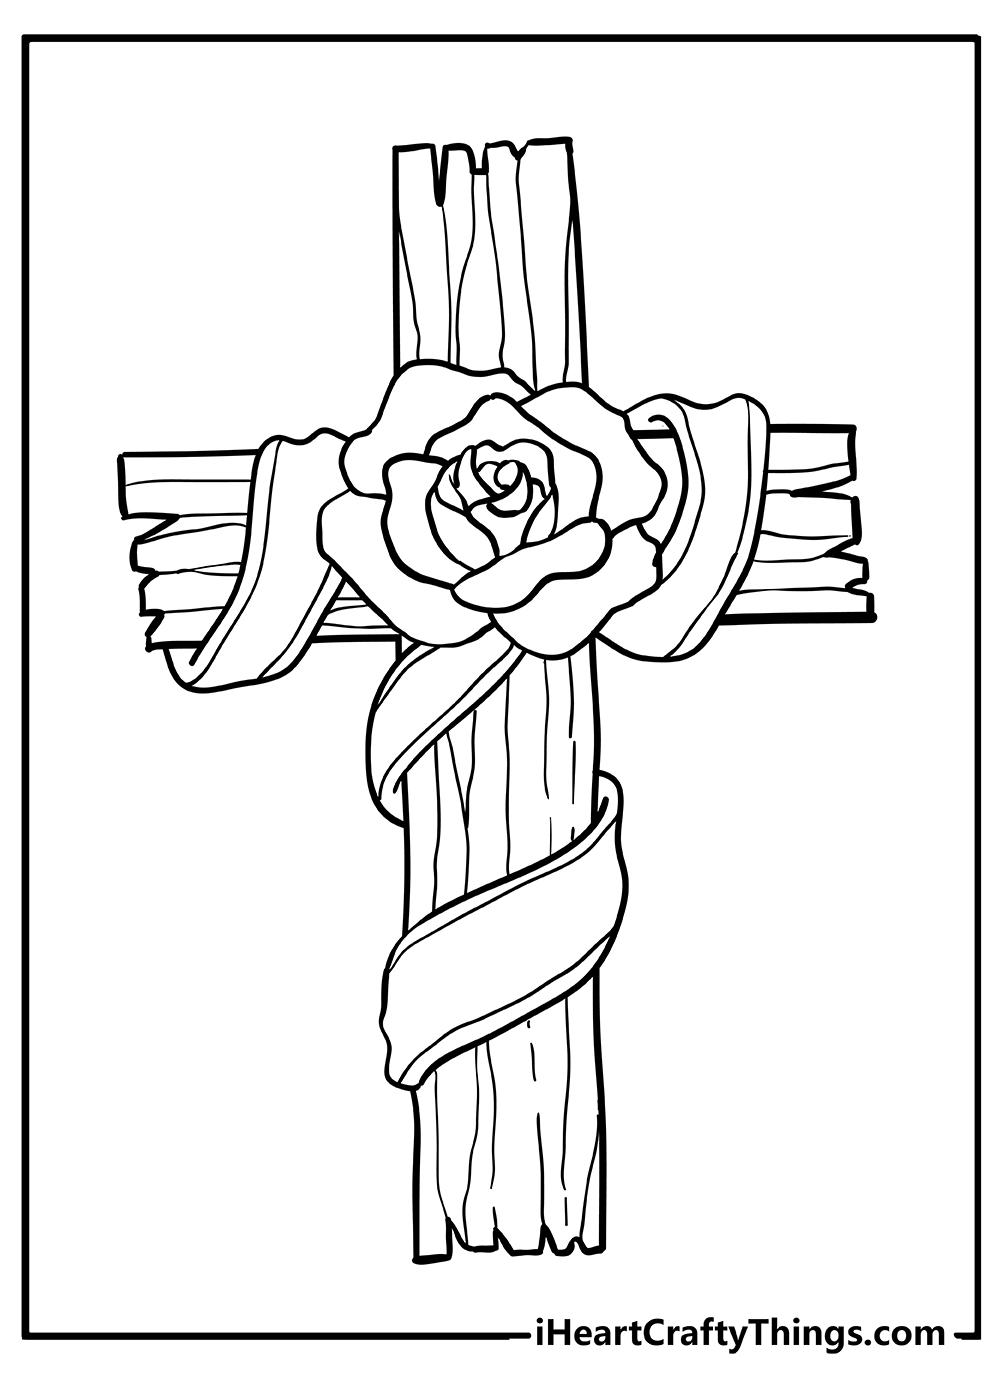 Cross Coloring Pages free pdf download